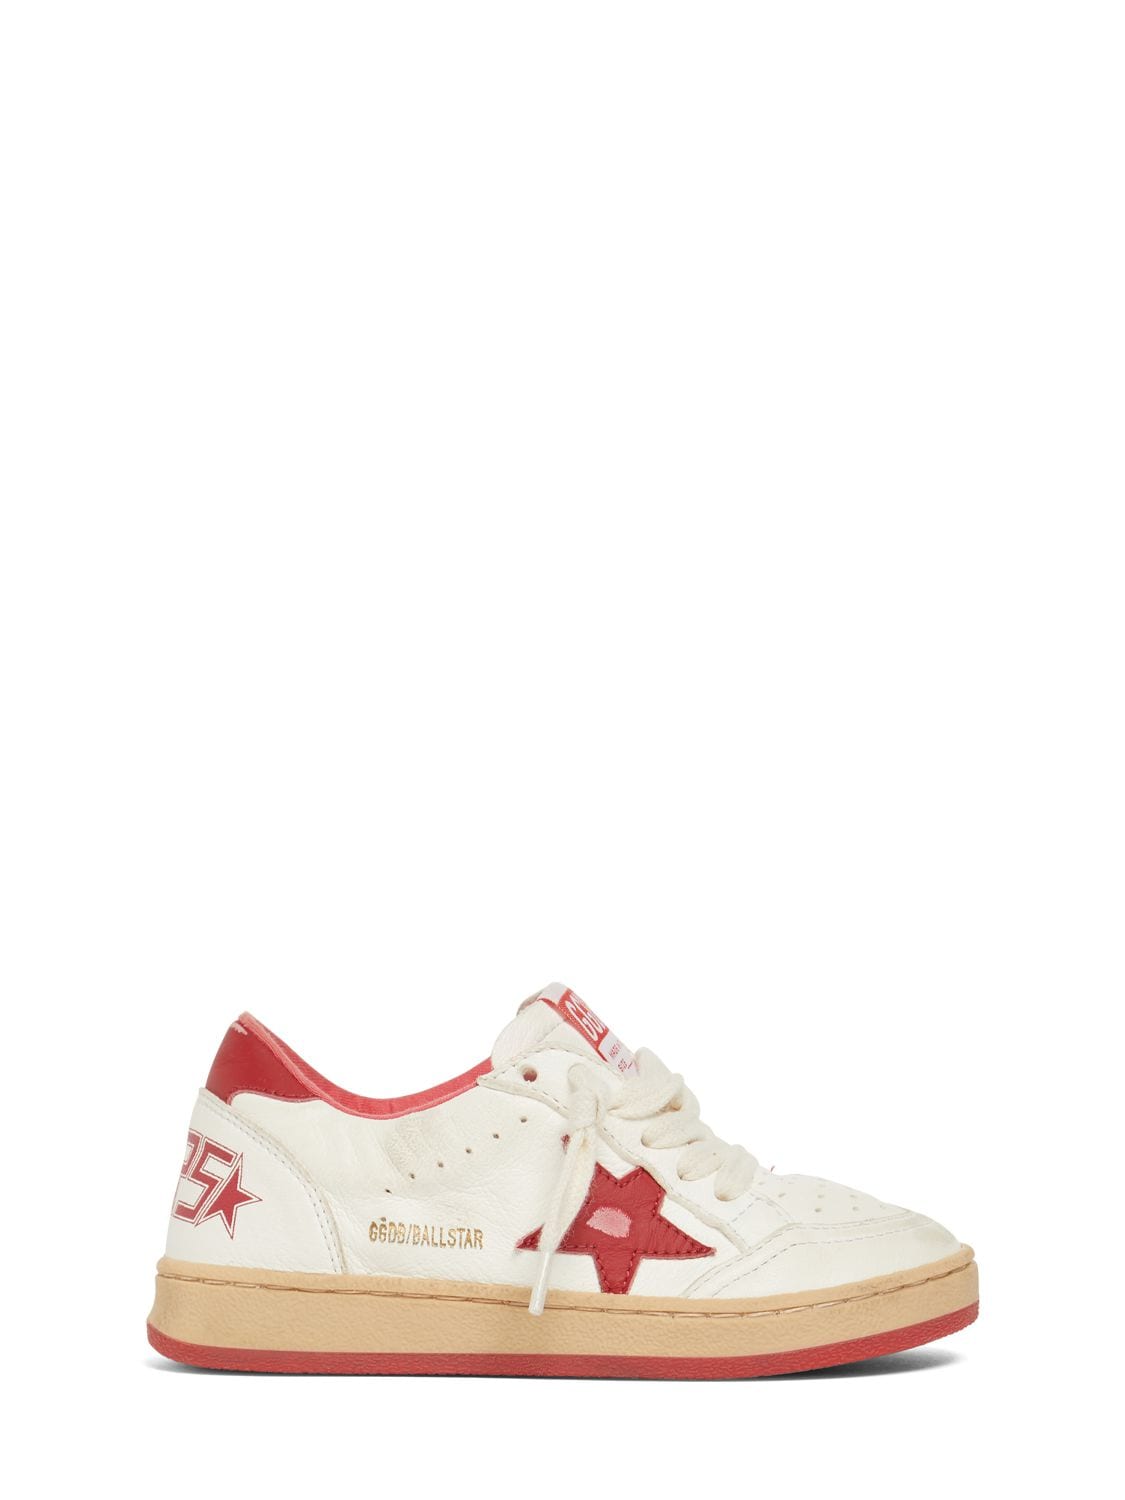 Golden Goose Kids' Ballstar Leather Lace-up Sneakers In 10350